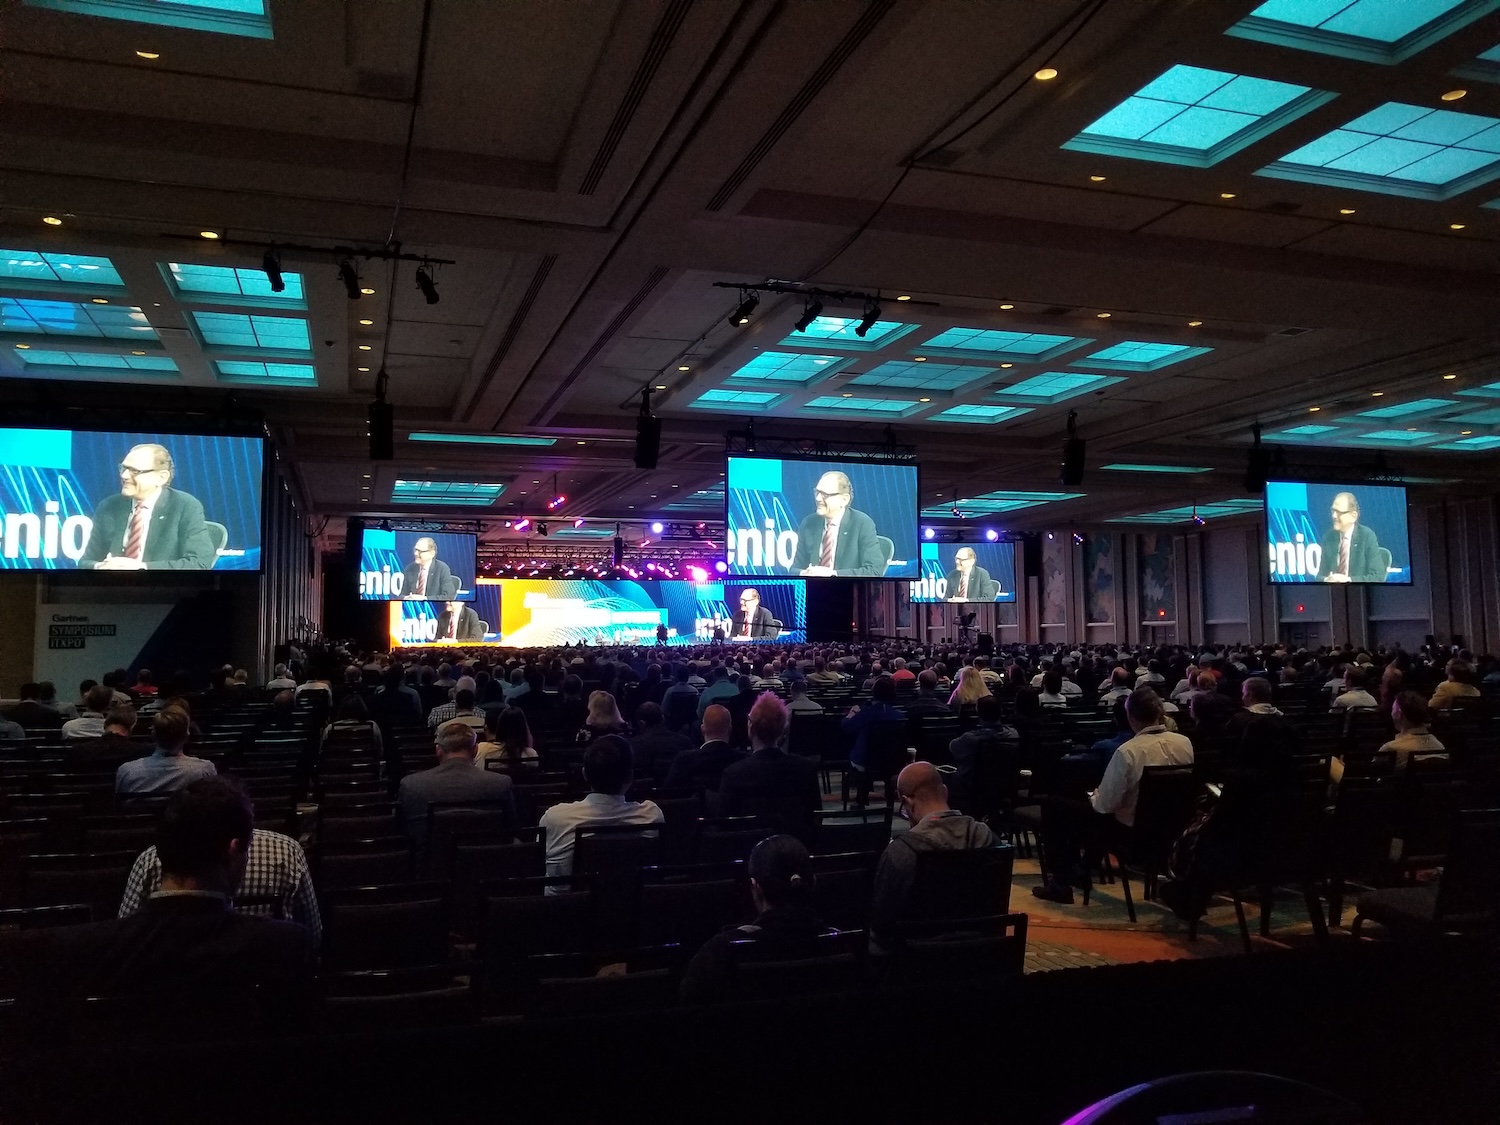 A conference event with a large audience, multiple screens showing a speaker, and a well-lit stage setting.